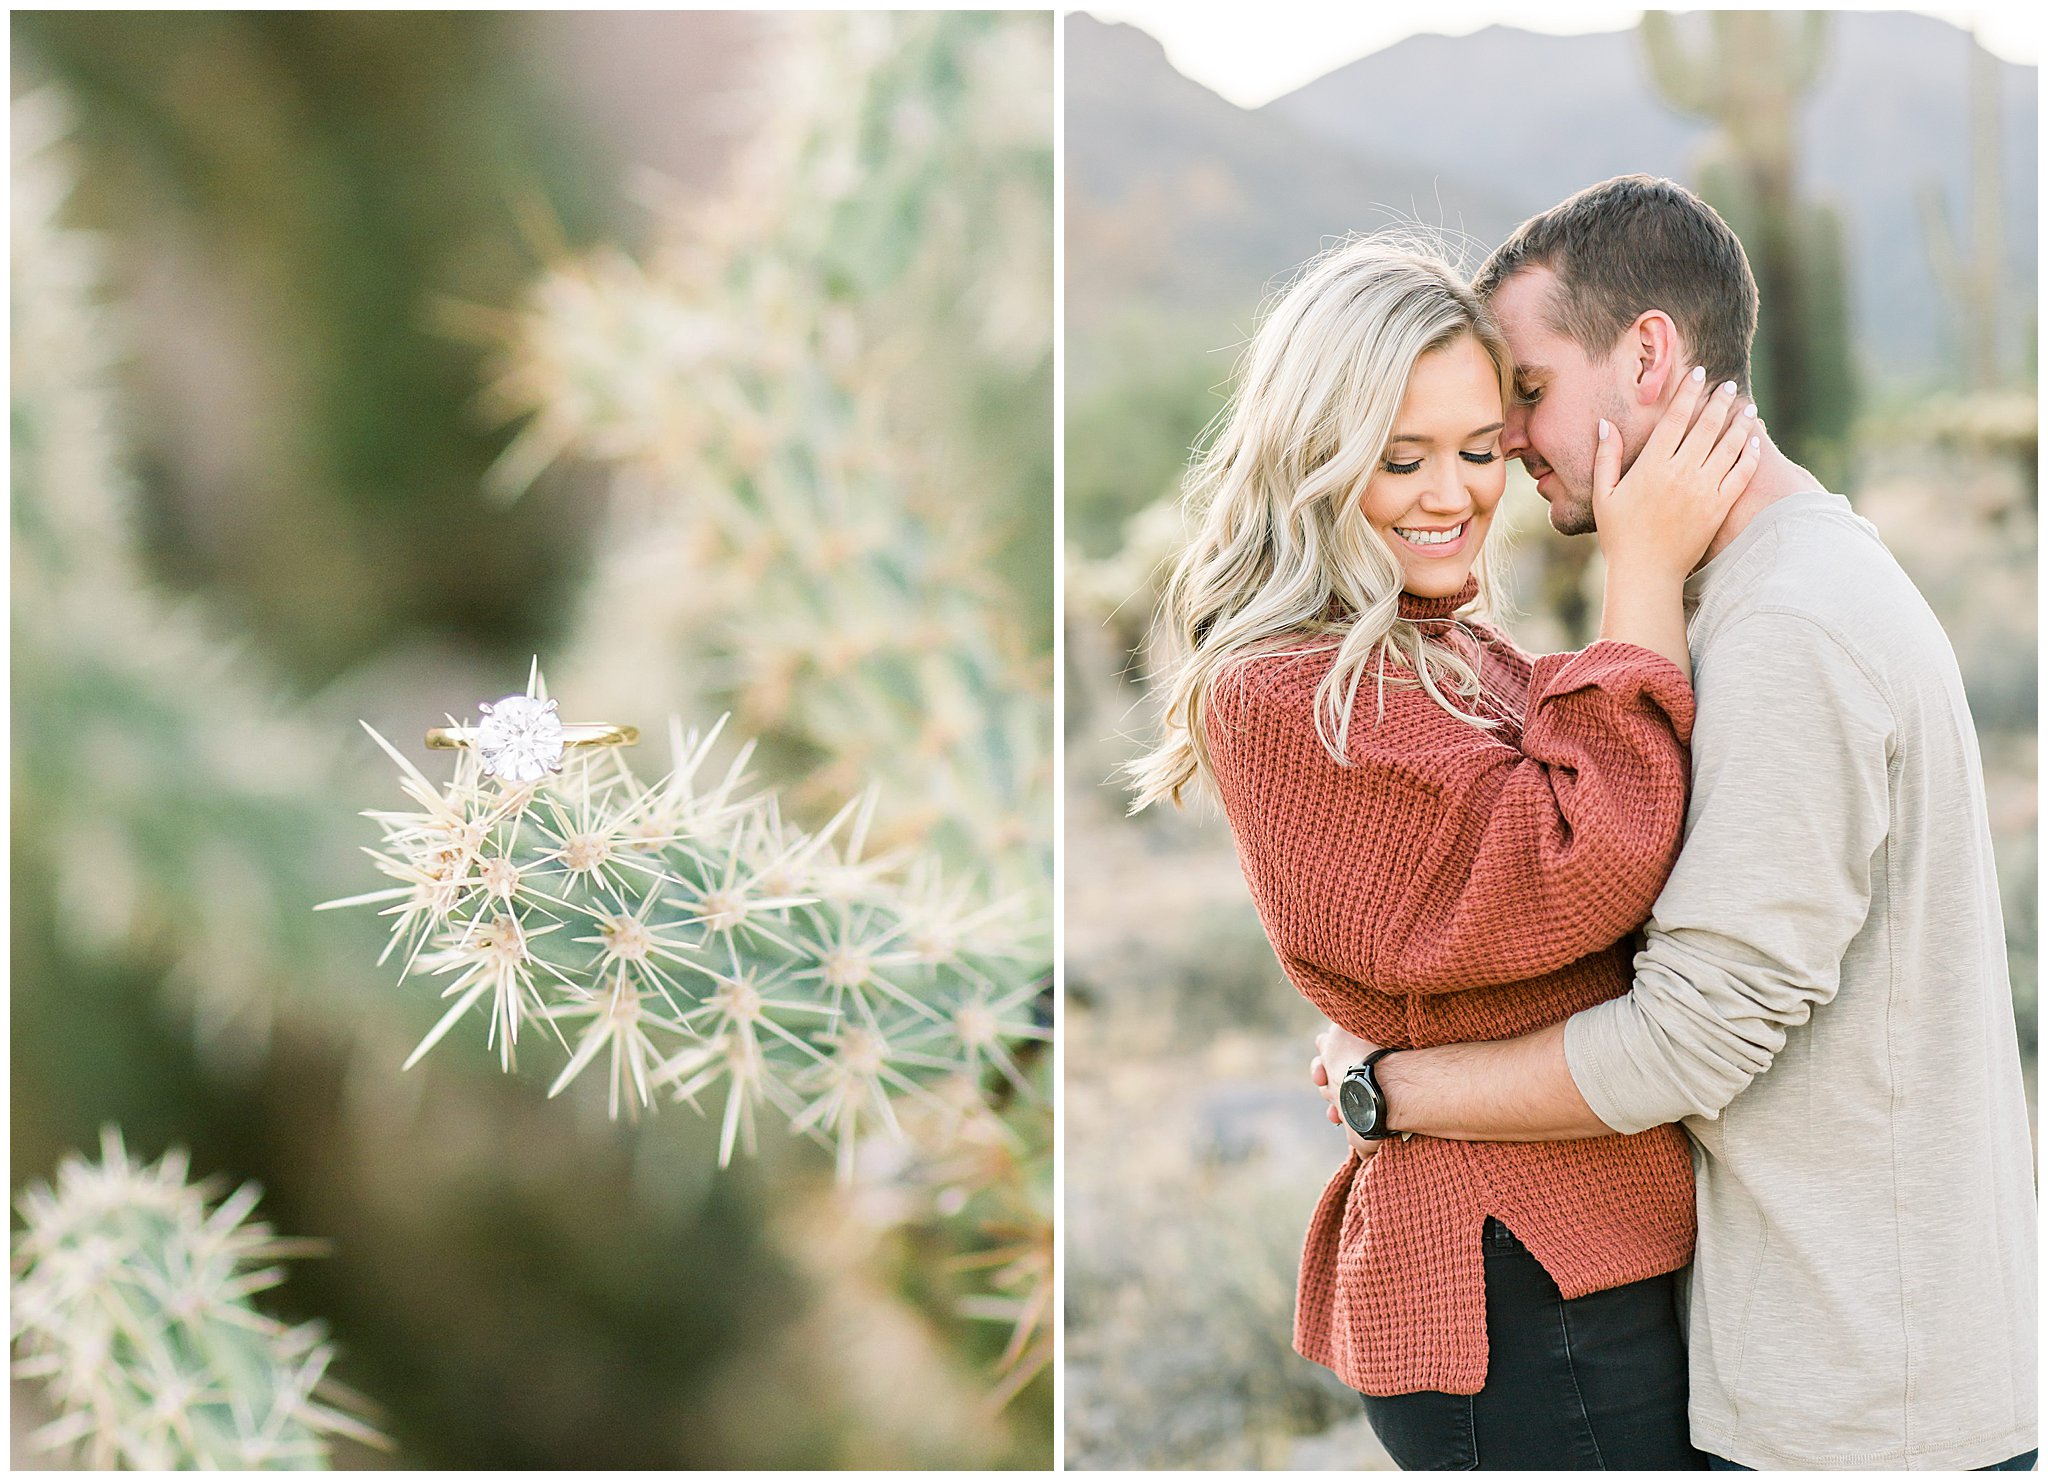 Desert engagement Pictures, Phoenix Desert Engagement Pictures, Sunset engagement Pictures, What to wear for an engagement Picture, Couple embracing, Champagne during engagement session, Champagne engagement Pictures